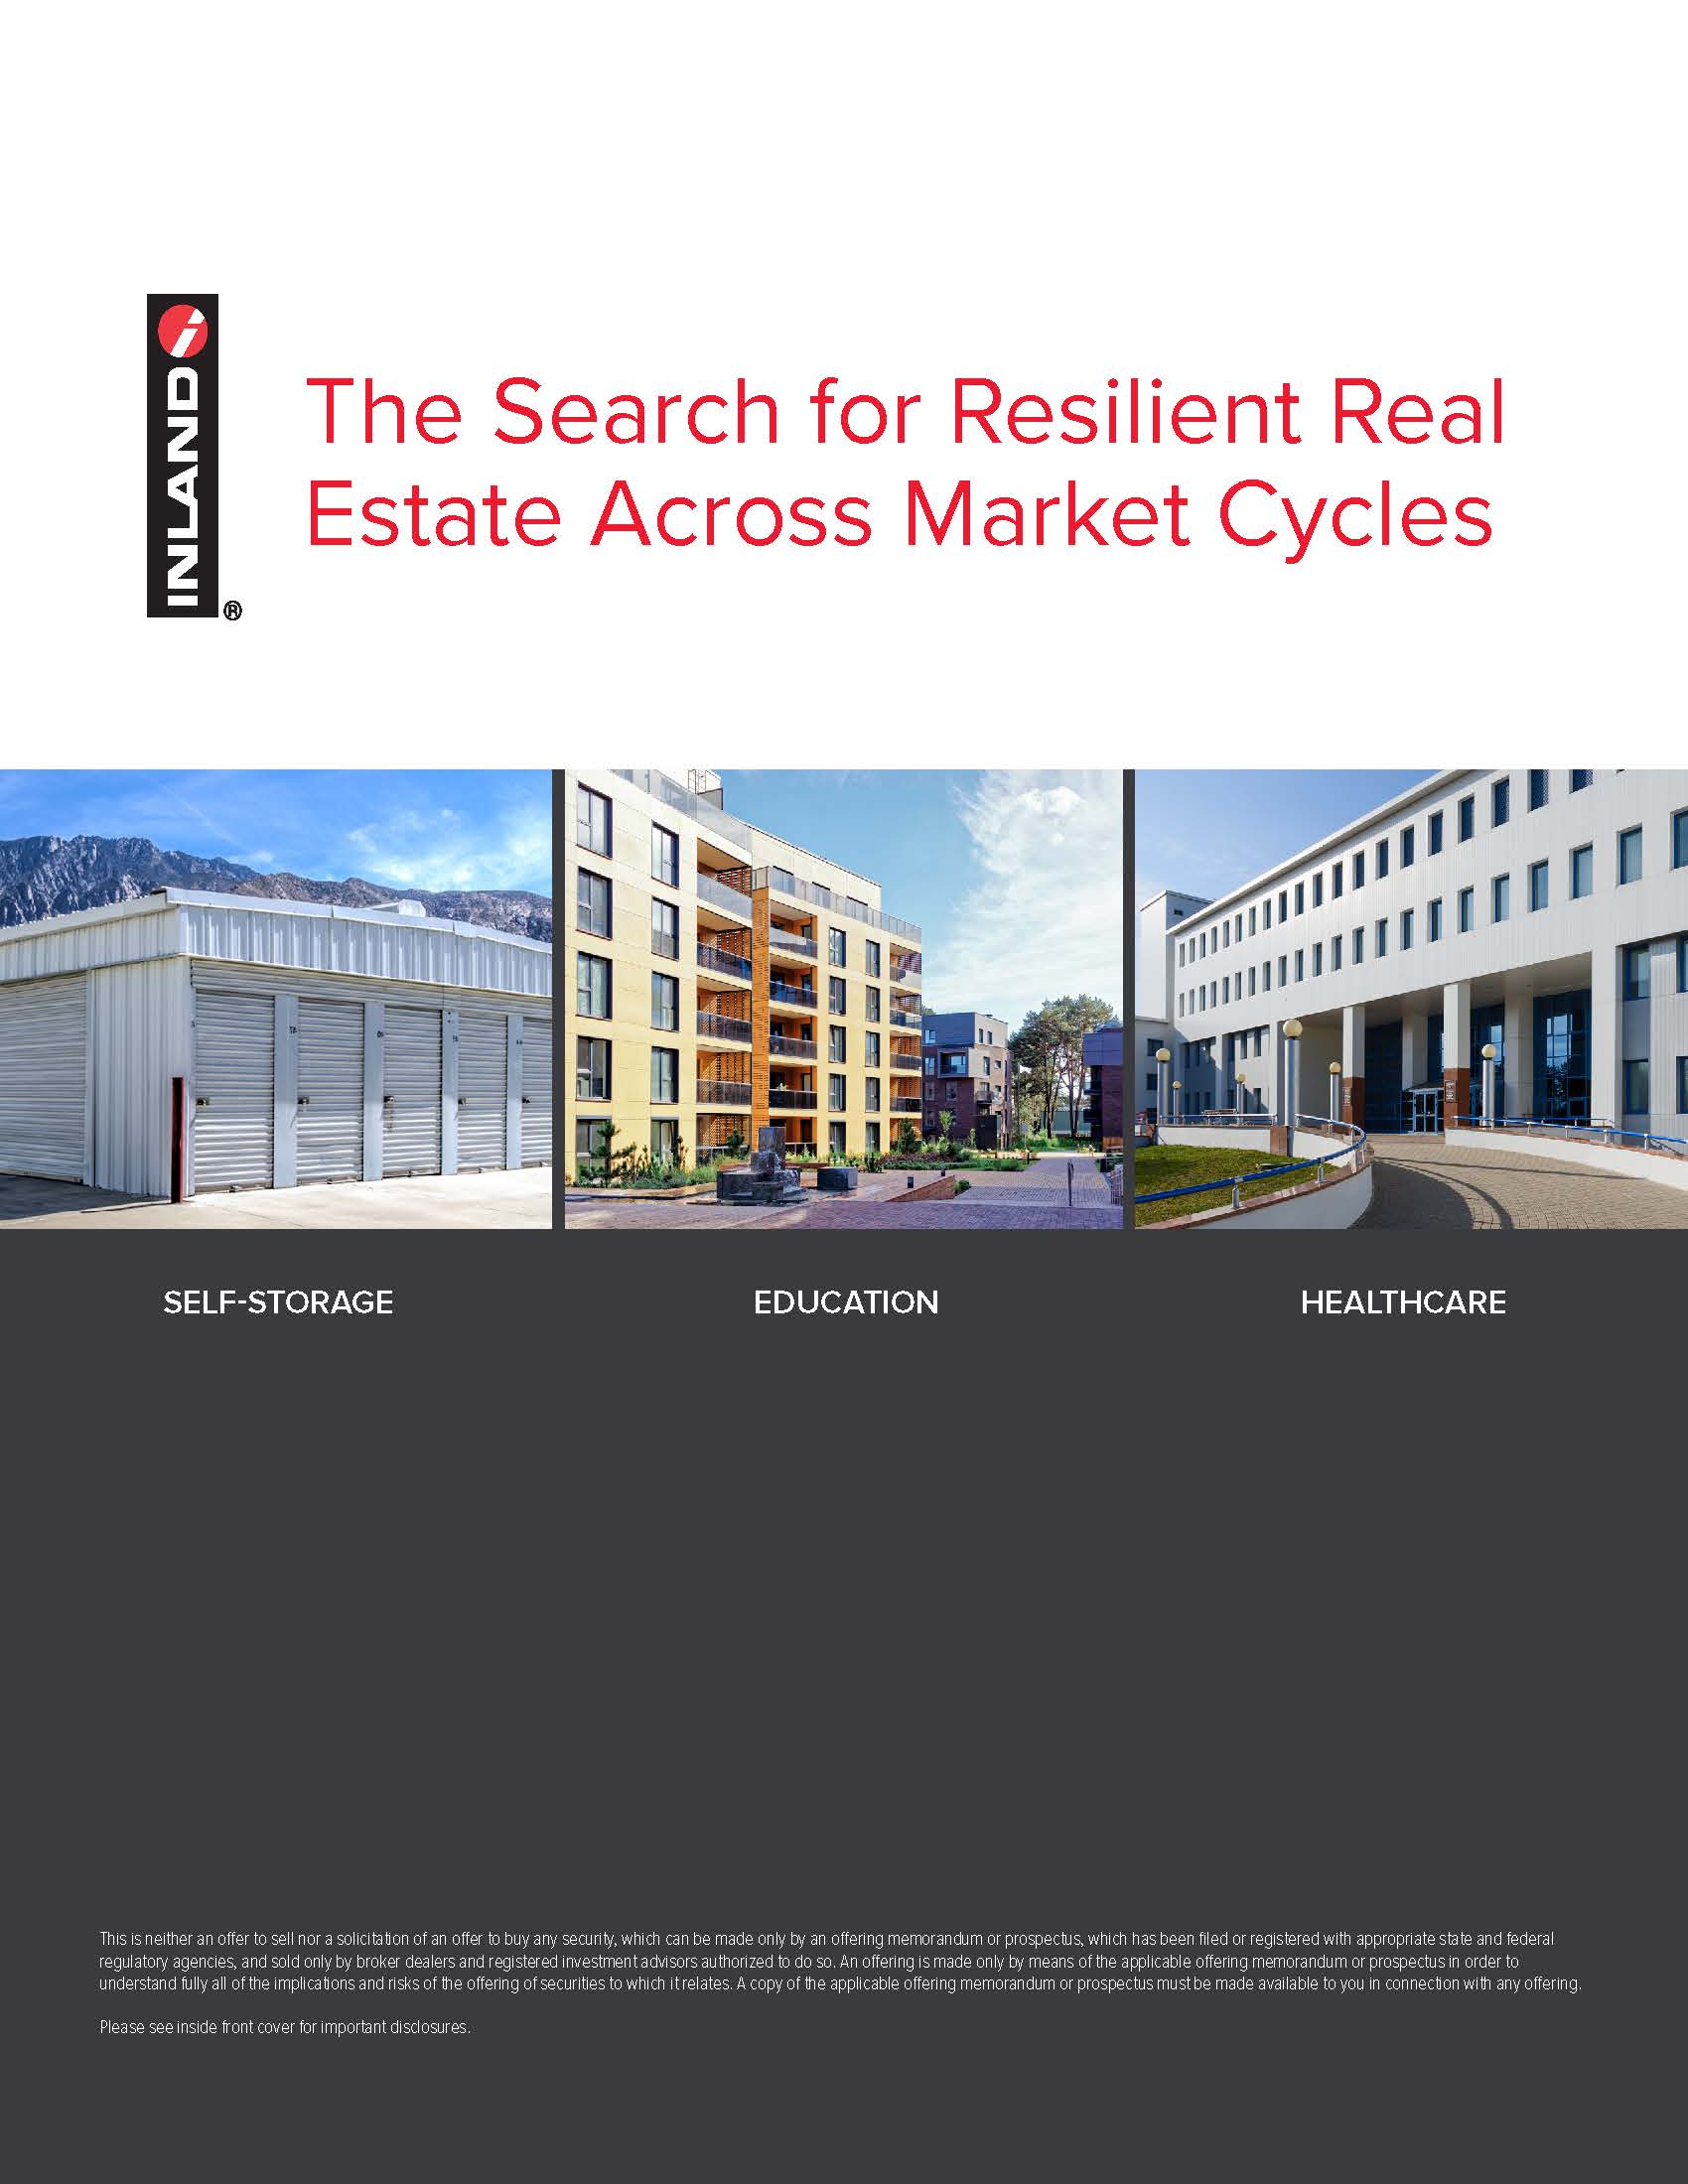 IREIC-The-Search-For-Resilient-Real-Estate-Thumbnail-2